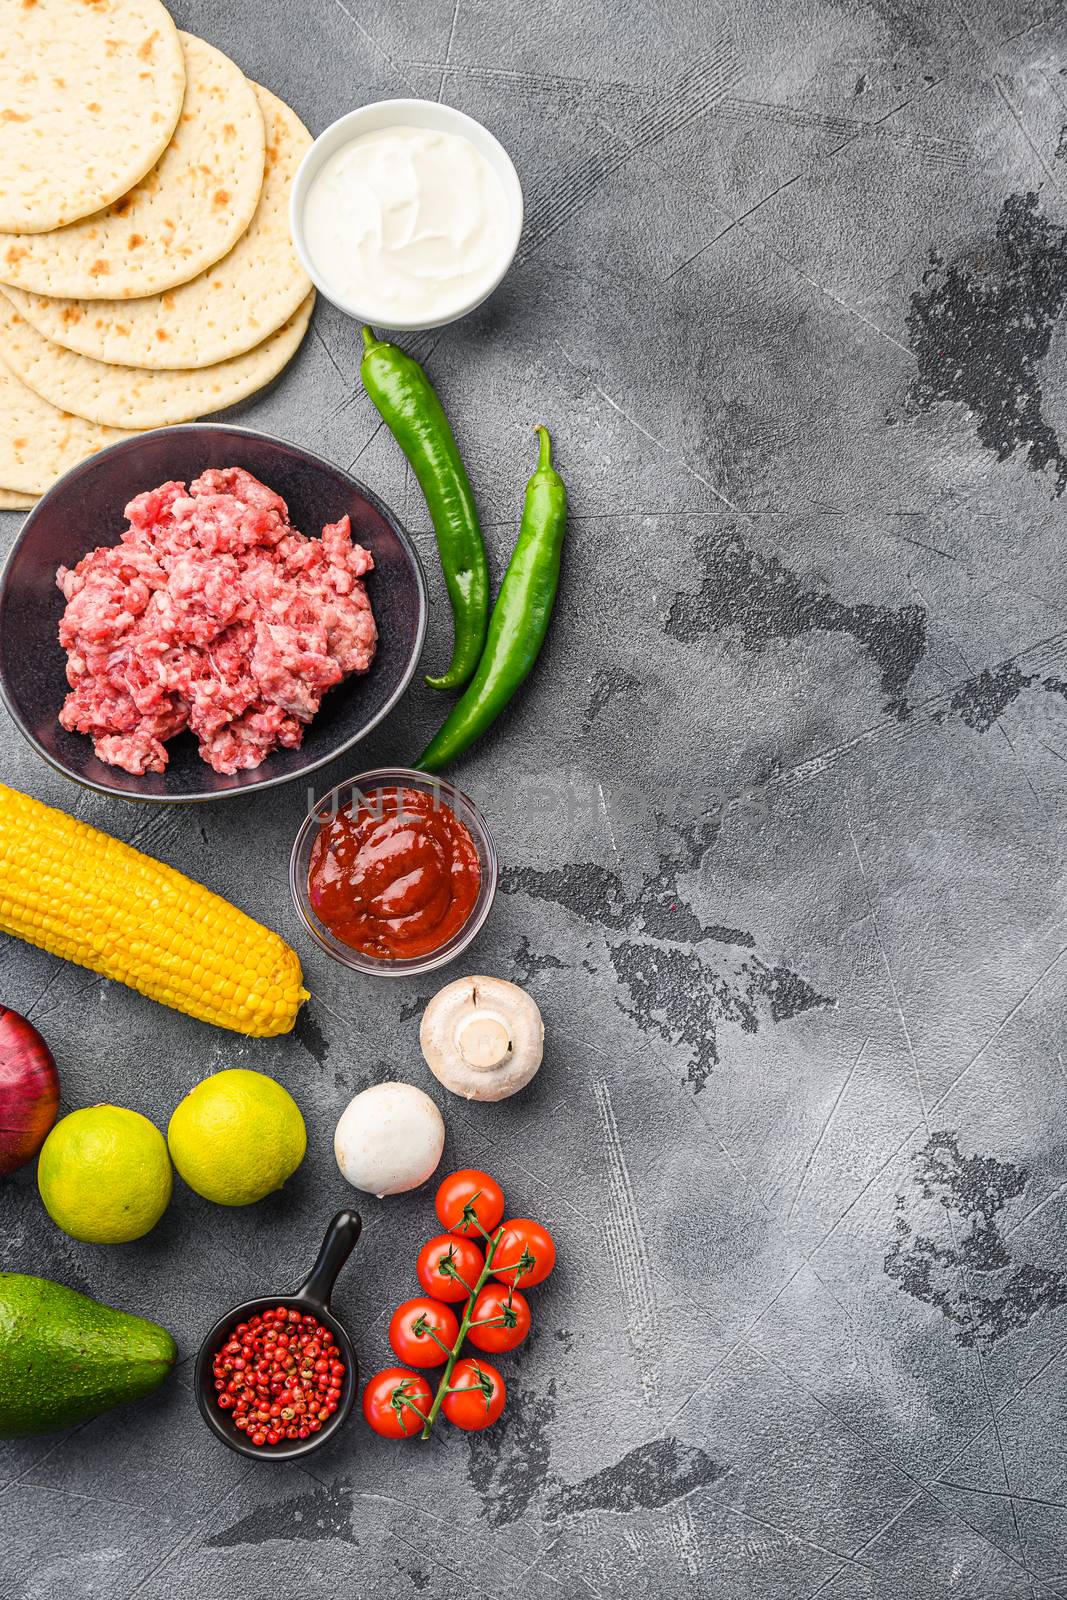 Ingredients for beef meat mexican tacos , corn tortillas, chili pepper, avocado, meat on textured grey background, top view vertical with space for text. by Ilianesolenyi